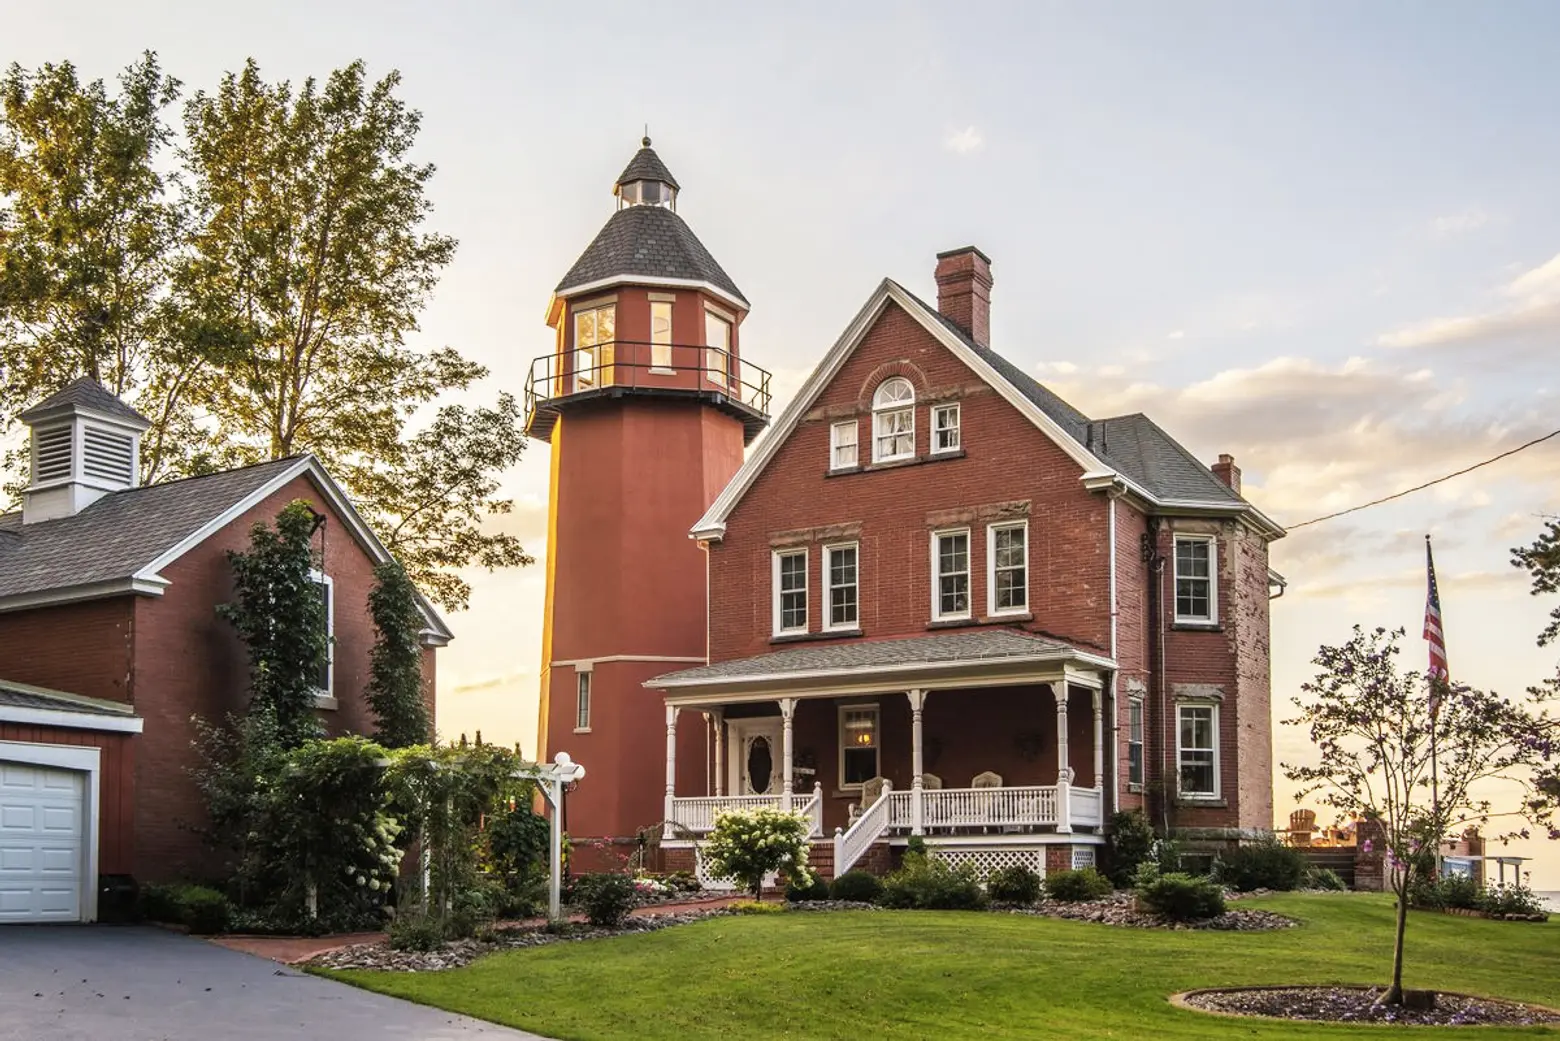 For $1.5 Million, Live in an Upstate Red Victorian Lighthouse